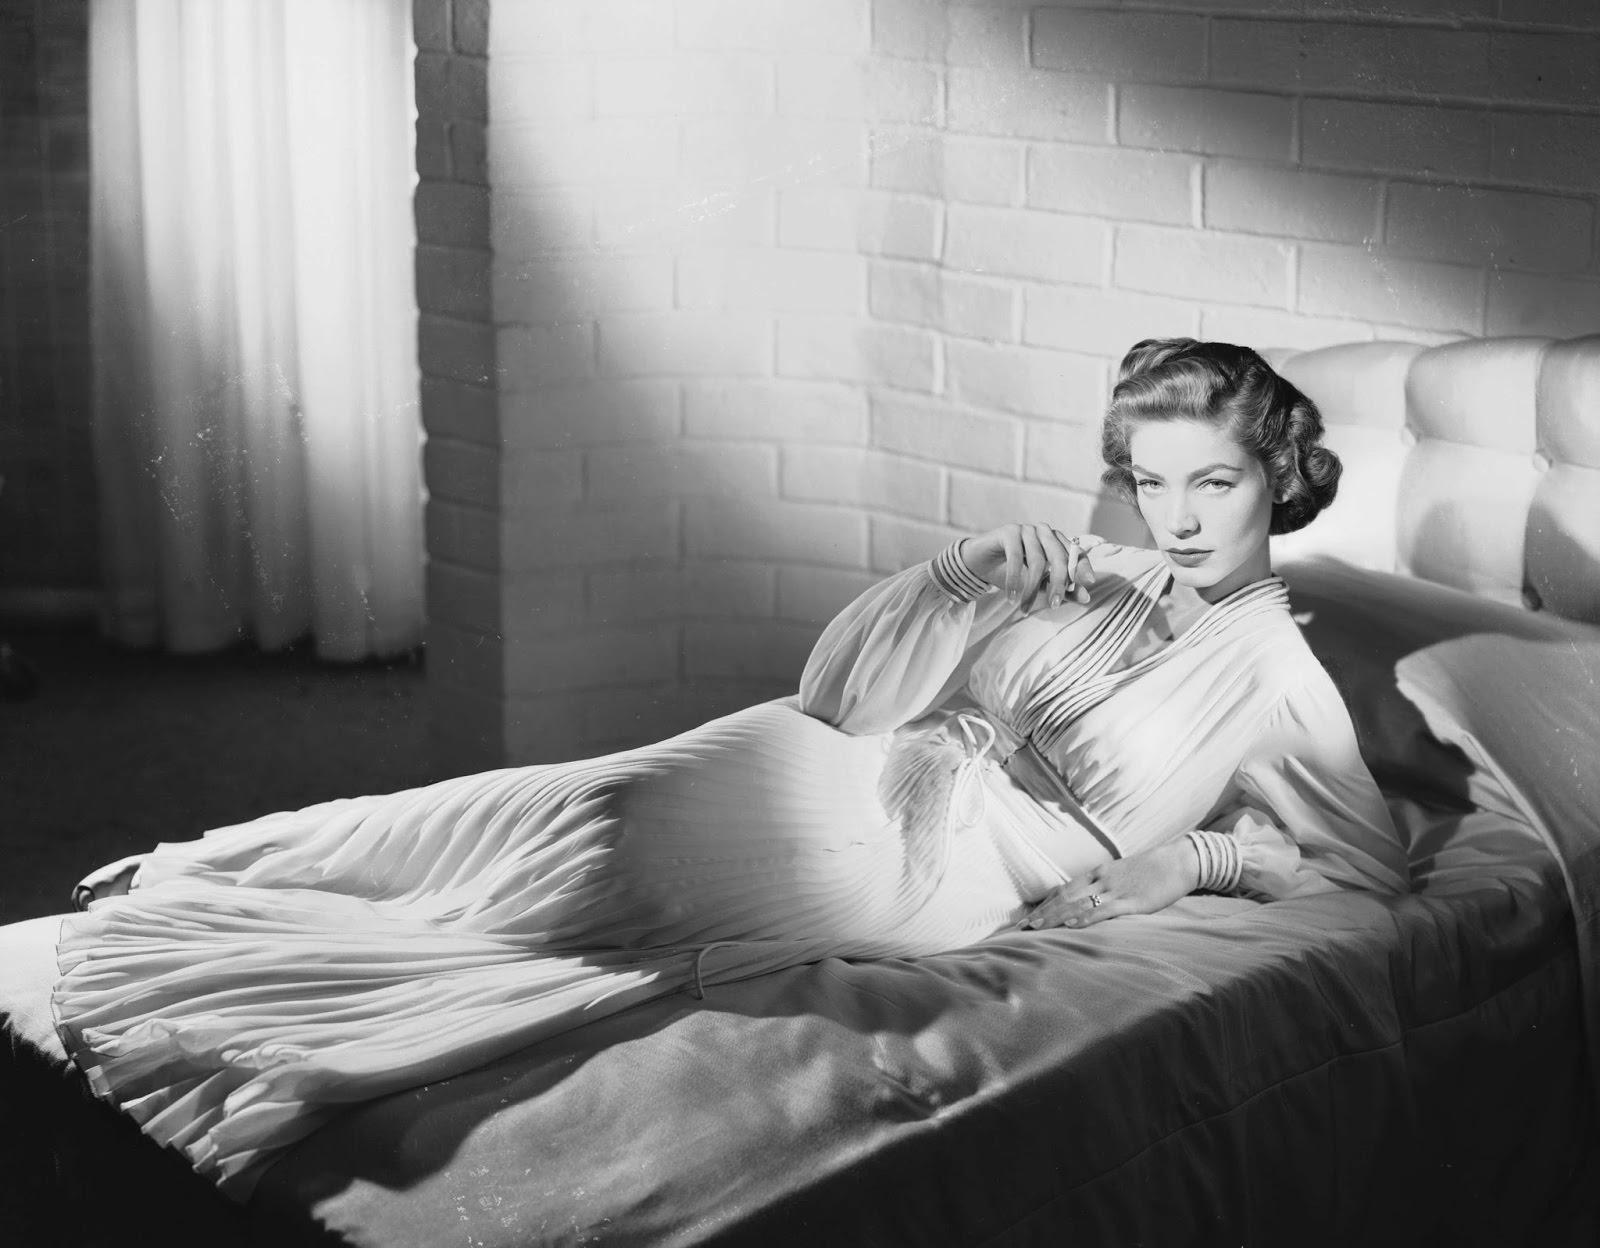 She was dubbed “Languorous Lauren” in this 1950 publicity shot.